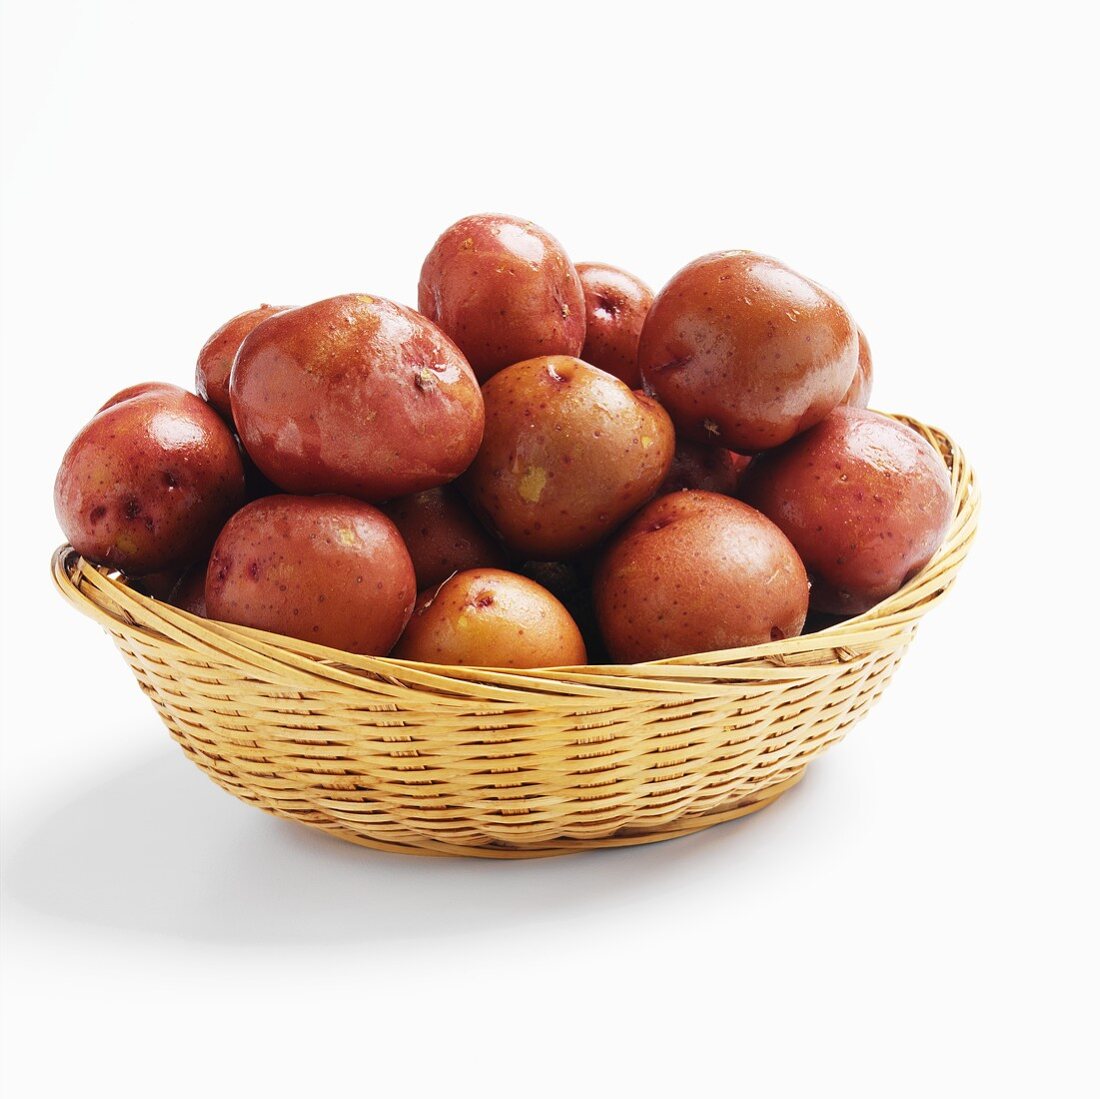 Red Potatoes in a Basket on White Background